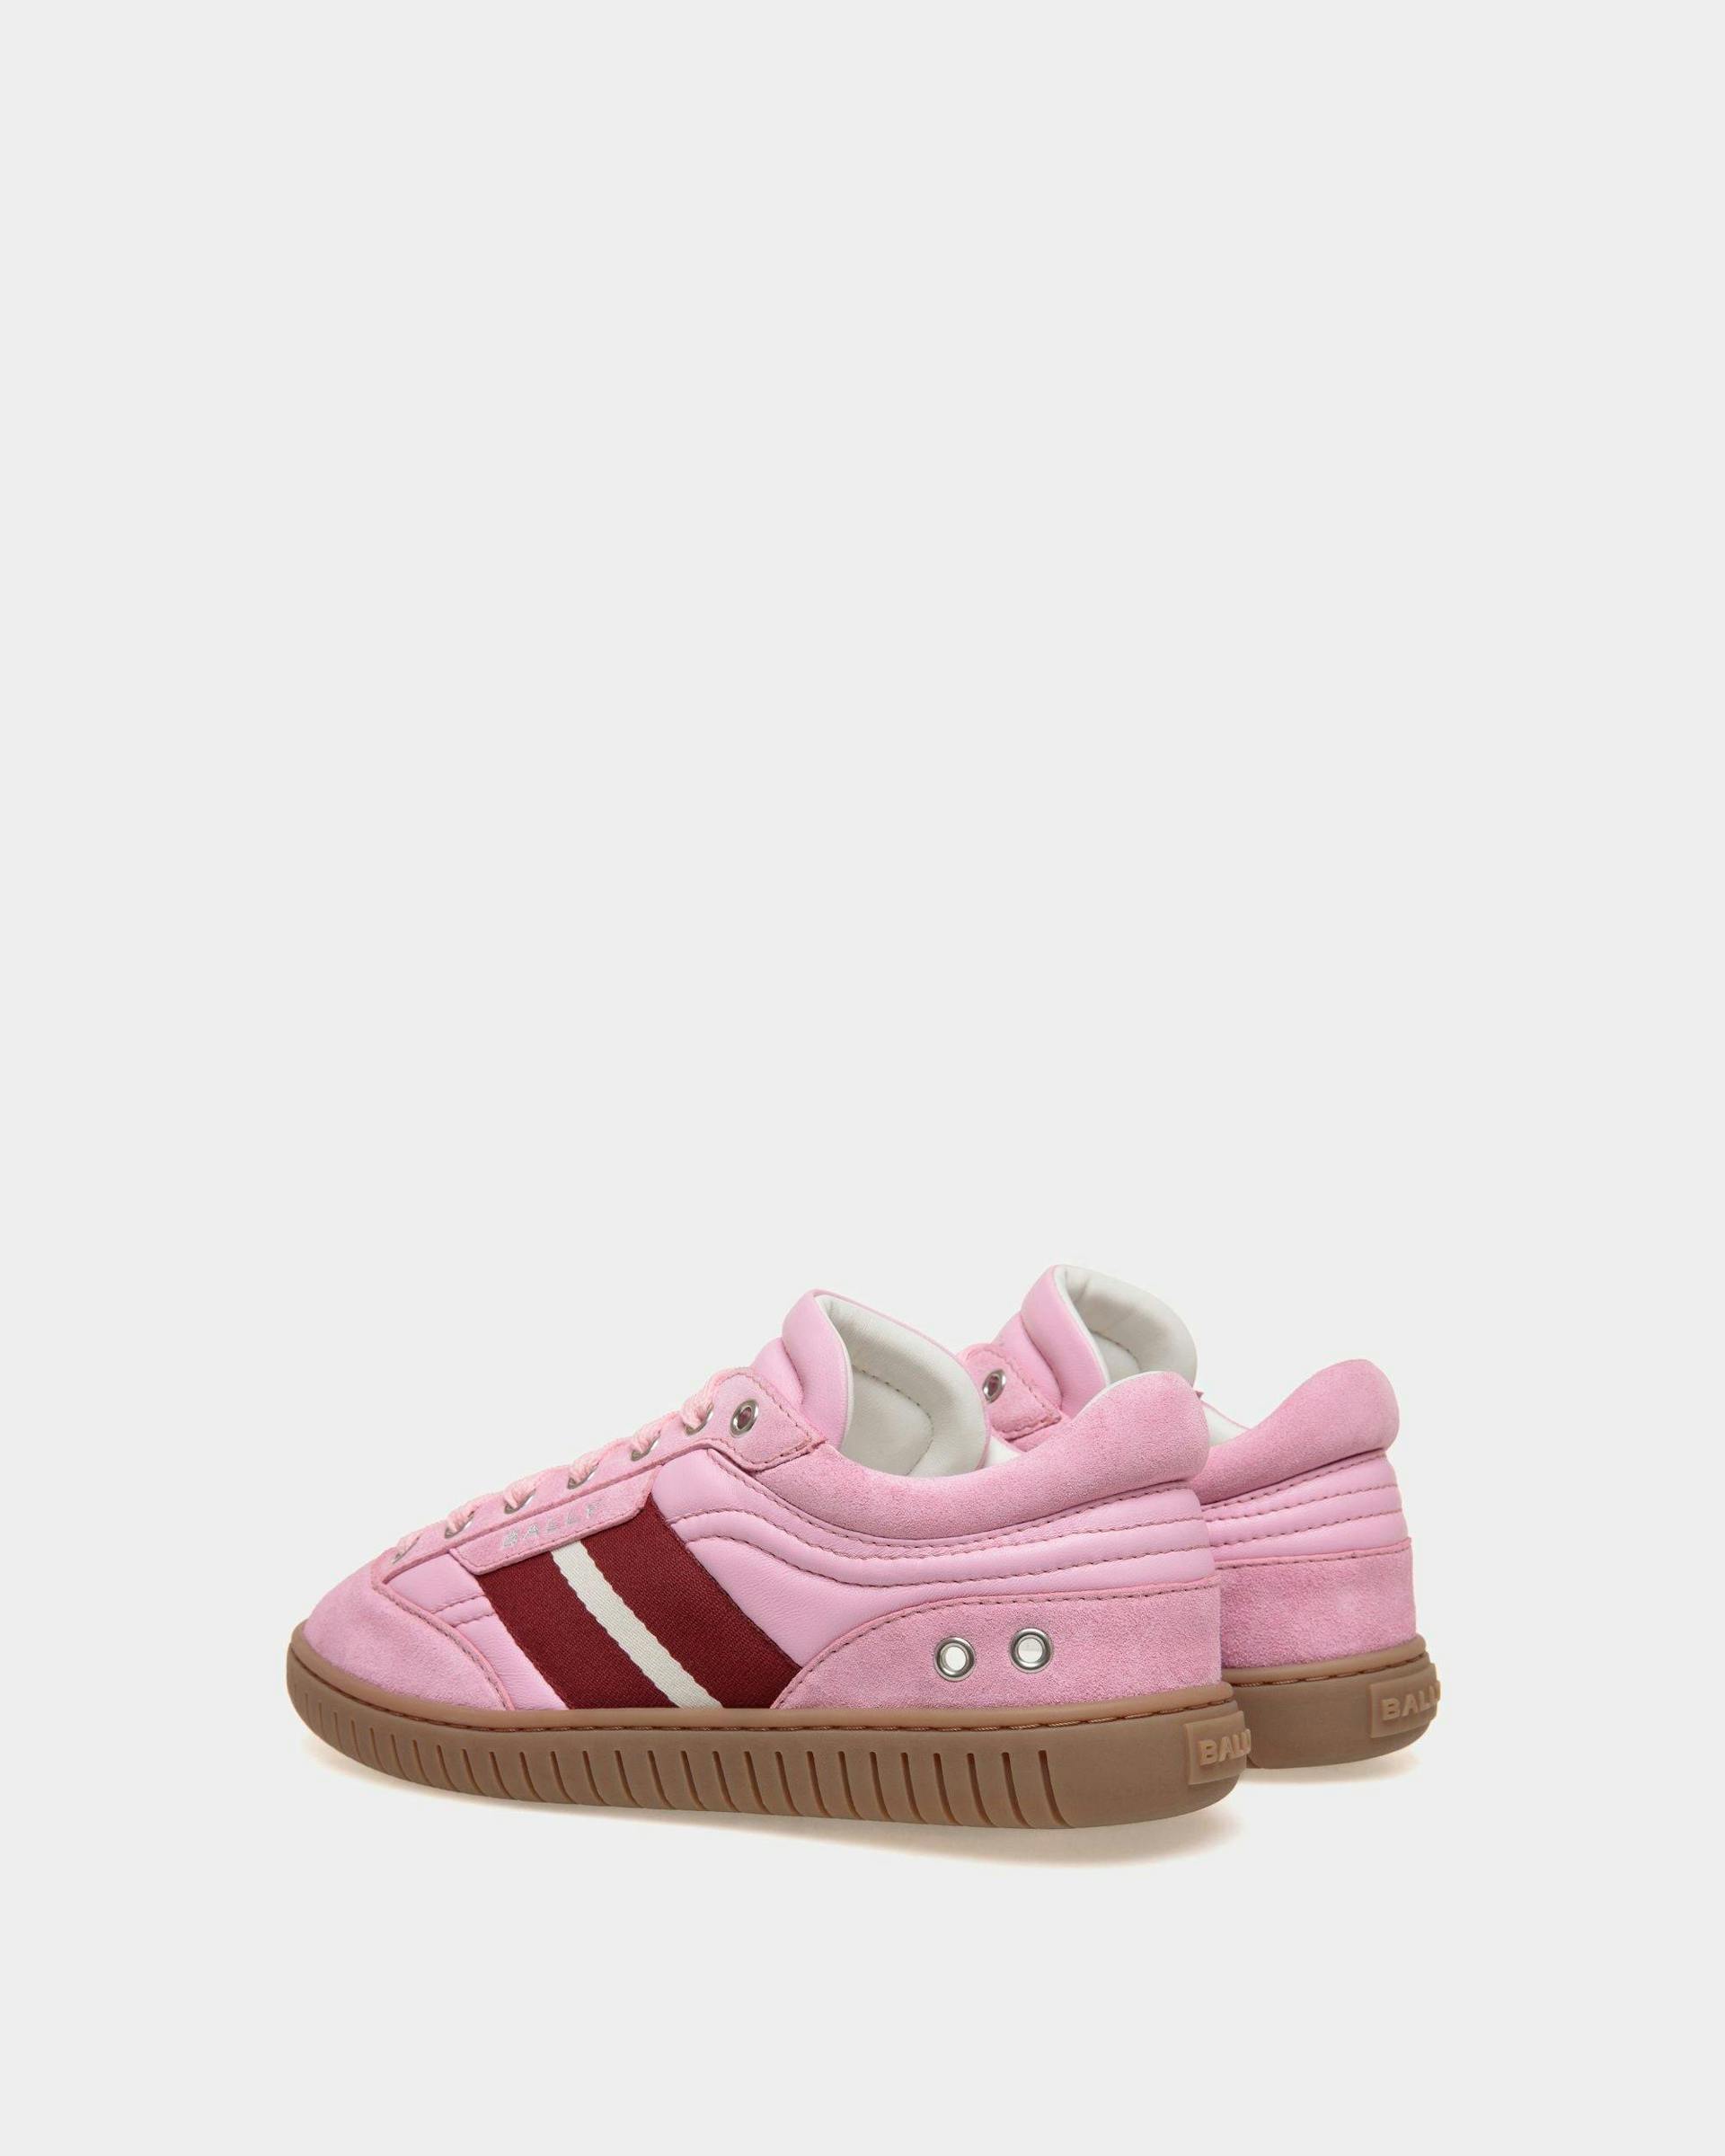 Women's Player Sneaker in Pink Leather and Suede | Bally | Still Life 3/4 Back